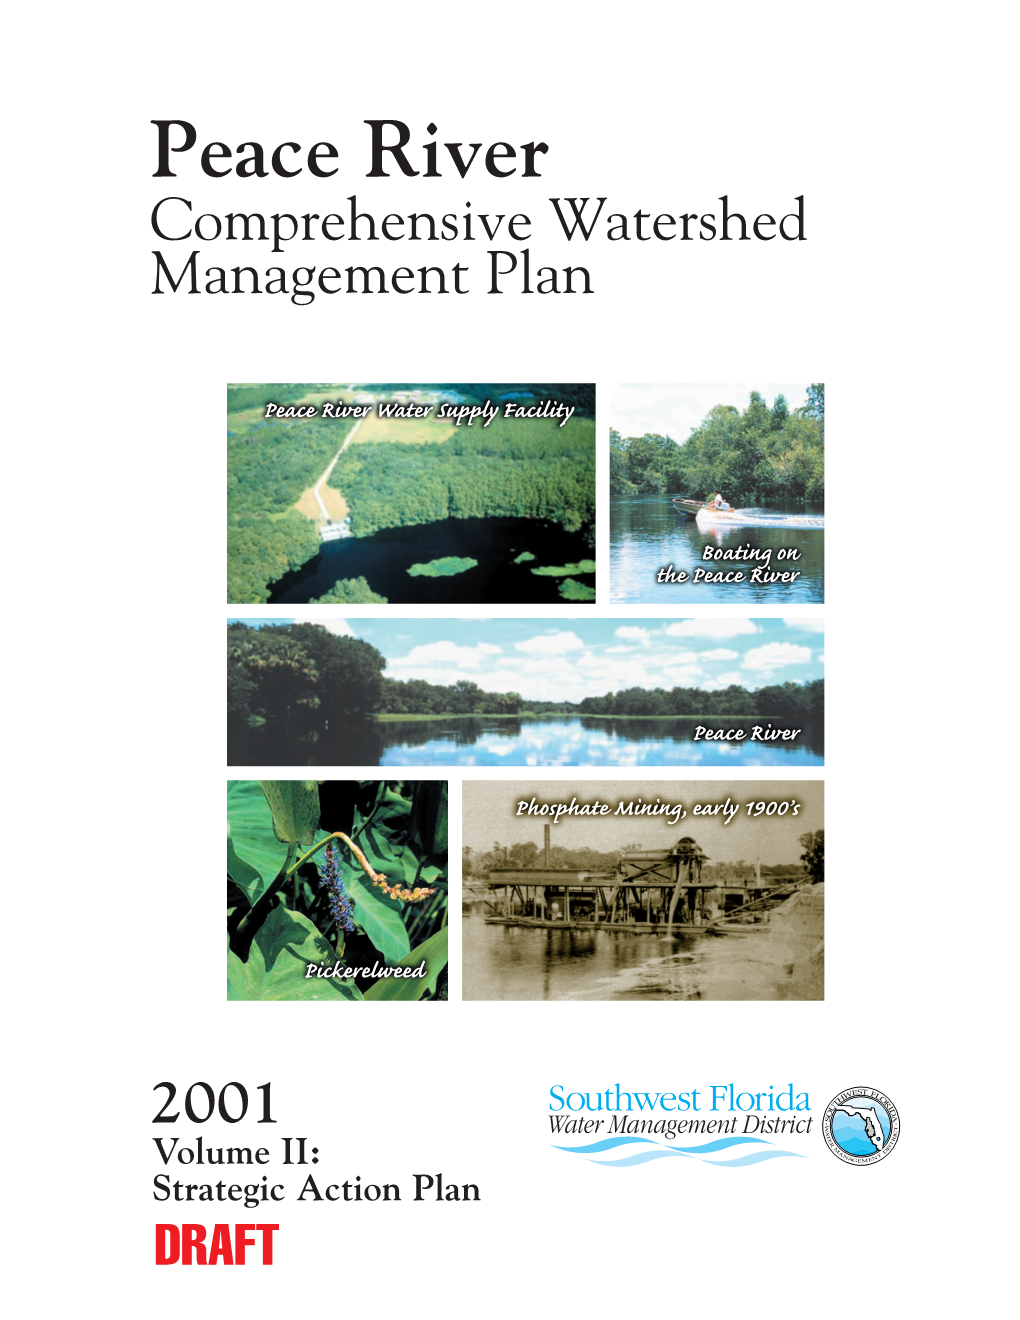 Peace River Comprehensive Watershed Management Plan